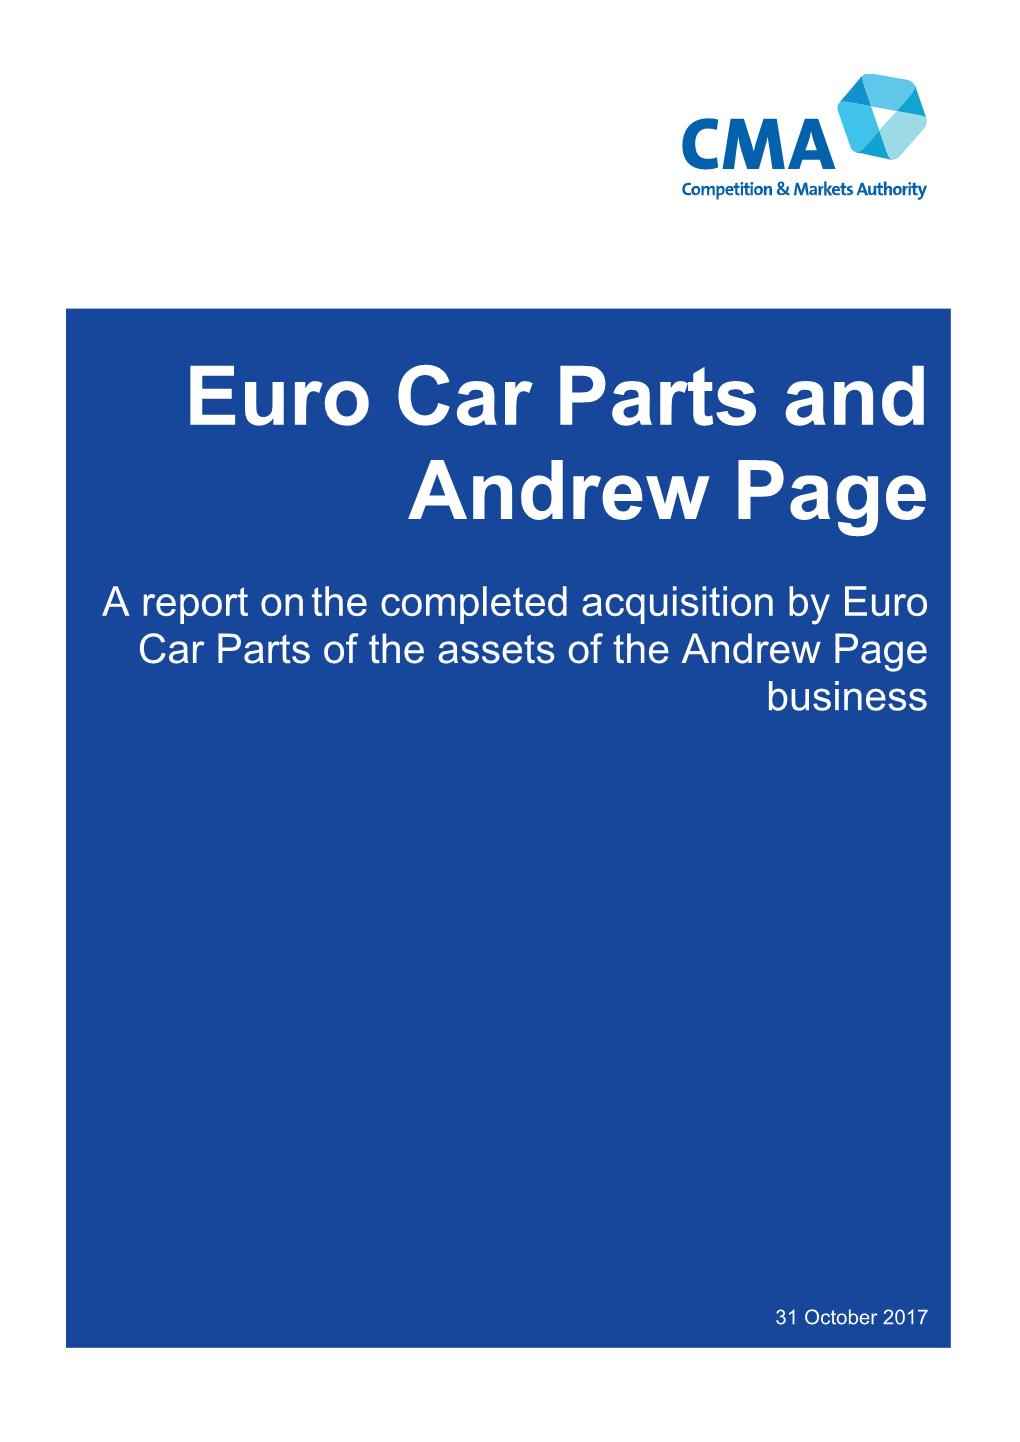 Euro Car Parts / Andrew Page Merger Inquiry: Final Report